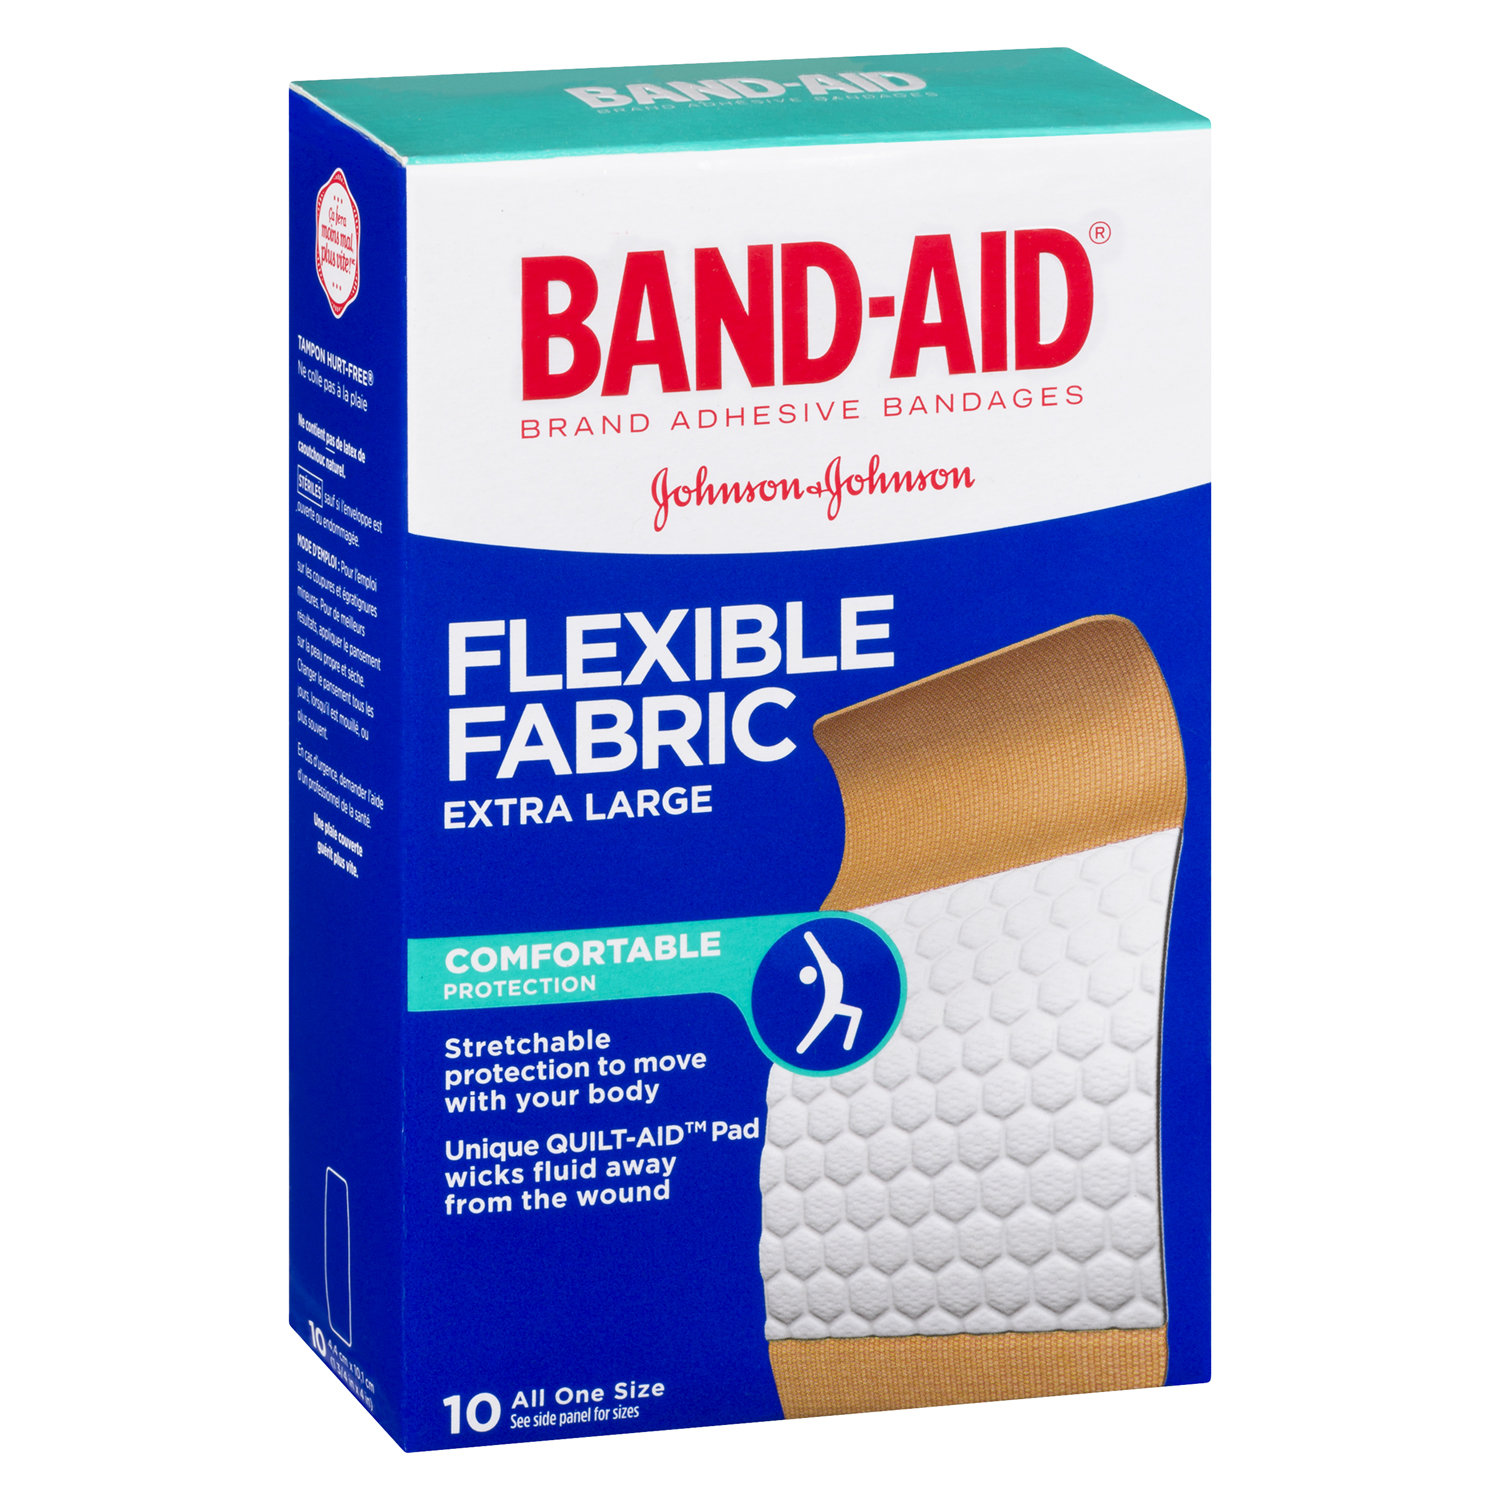 Band-Aid® Brand Flexible Fabric Adhesive Bandages, Flexible Protection &  Care of Minor Cuts & Scrapes, Quilt-Aid Pad for Painful Wounds, Light Brown